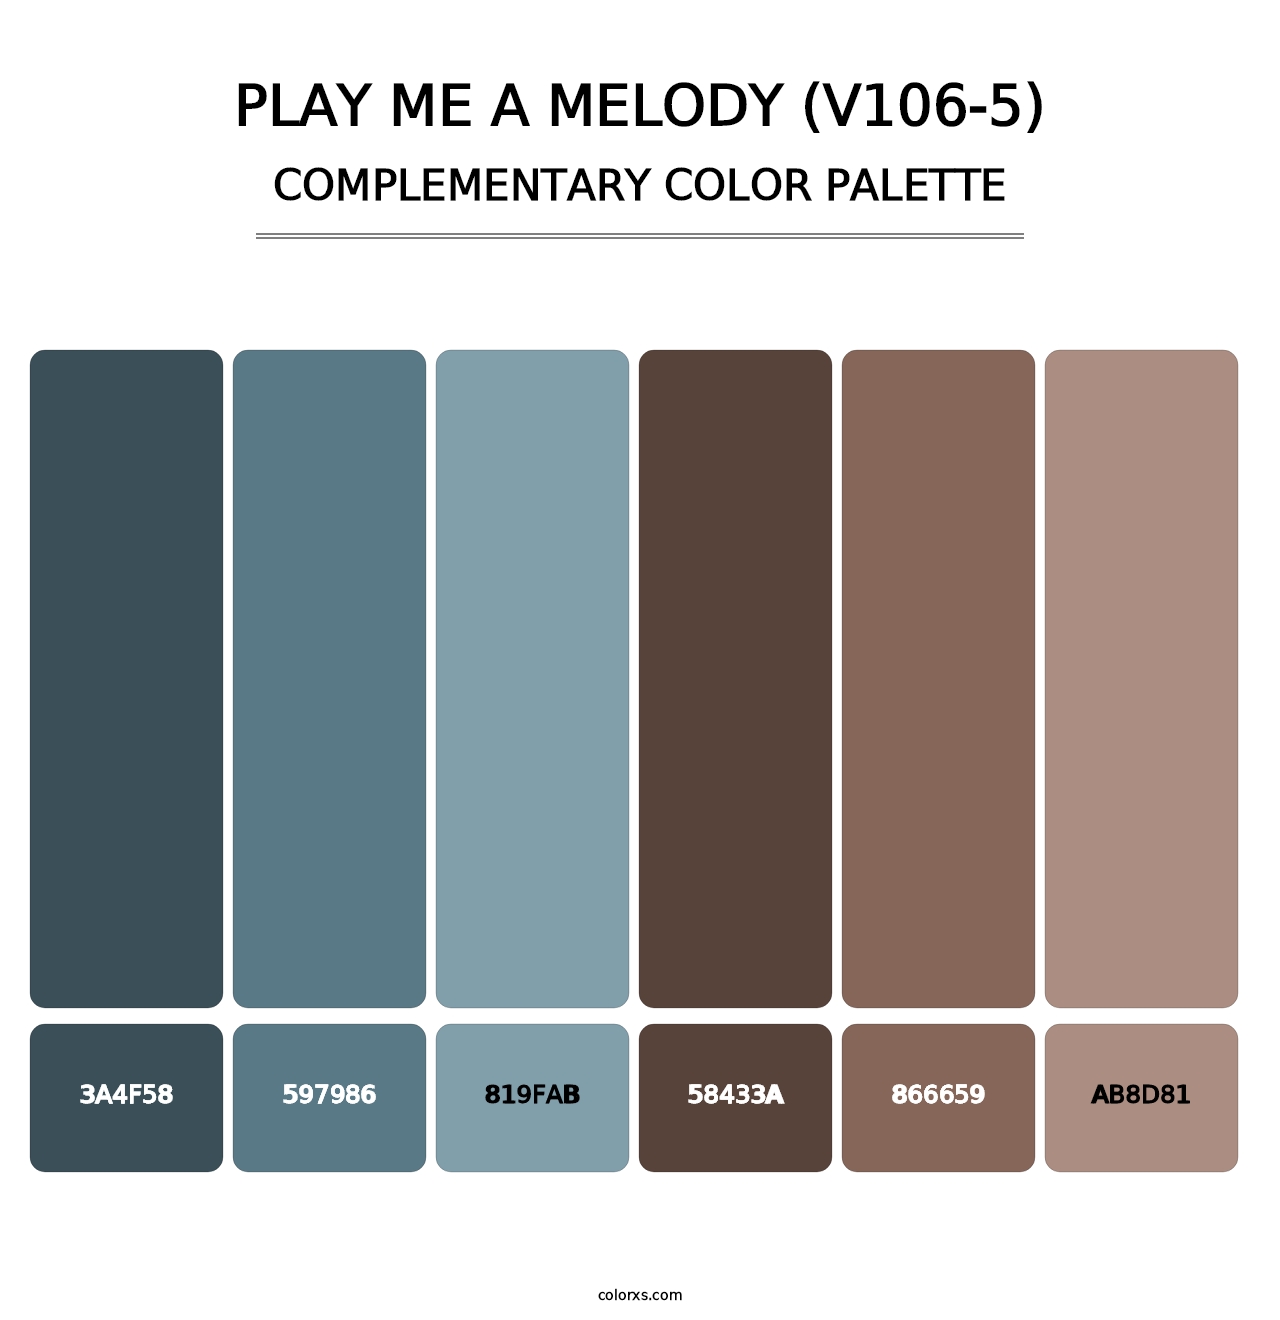 Play Me a Melody (V106-5) - Complementary Color Palette